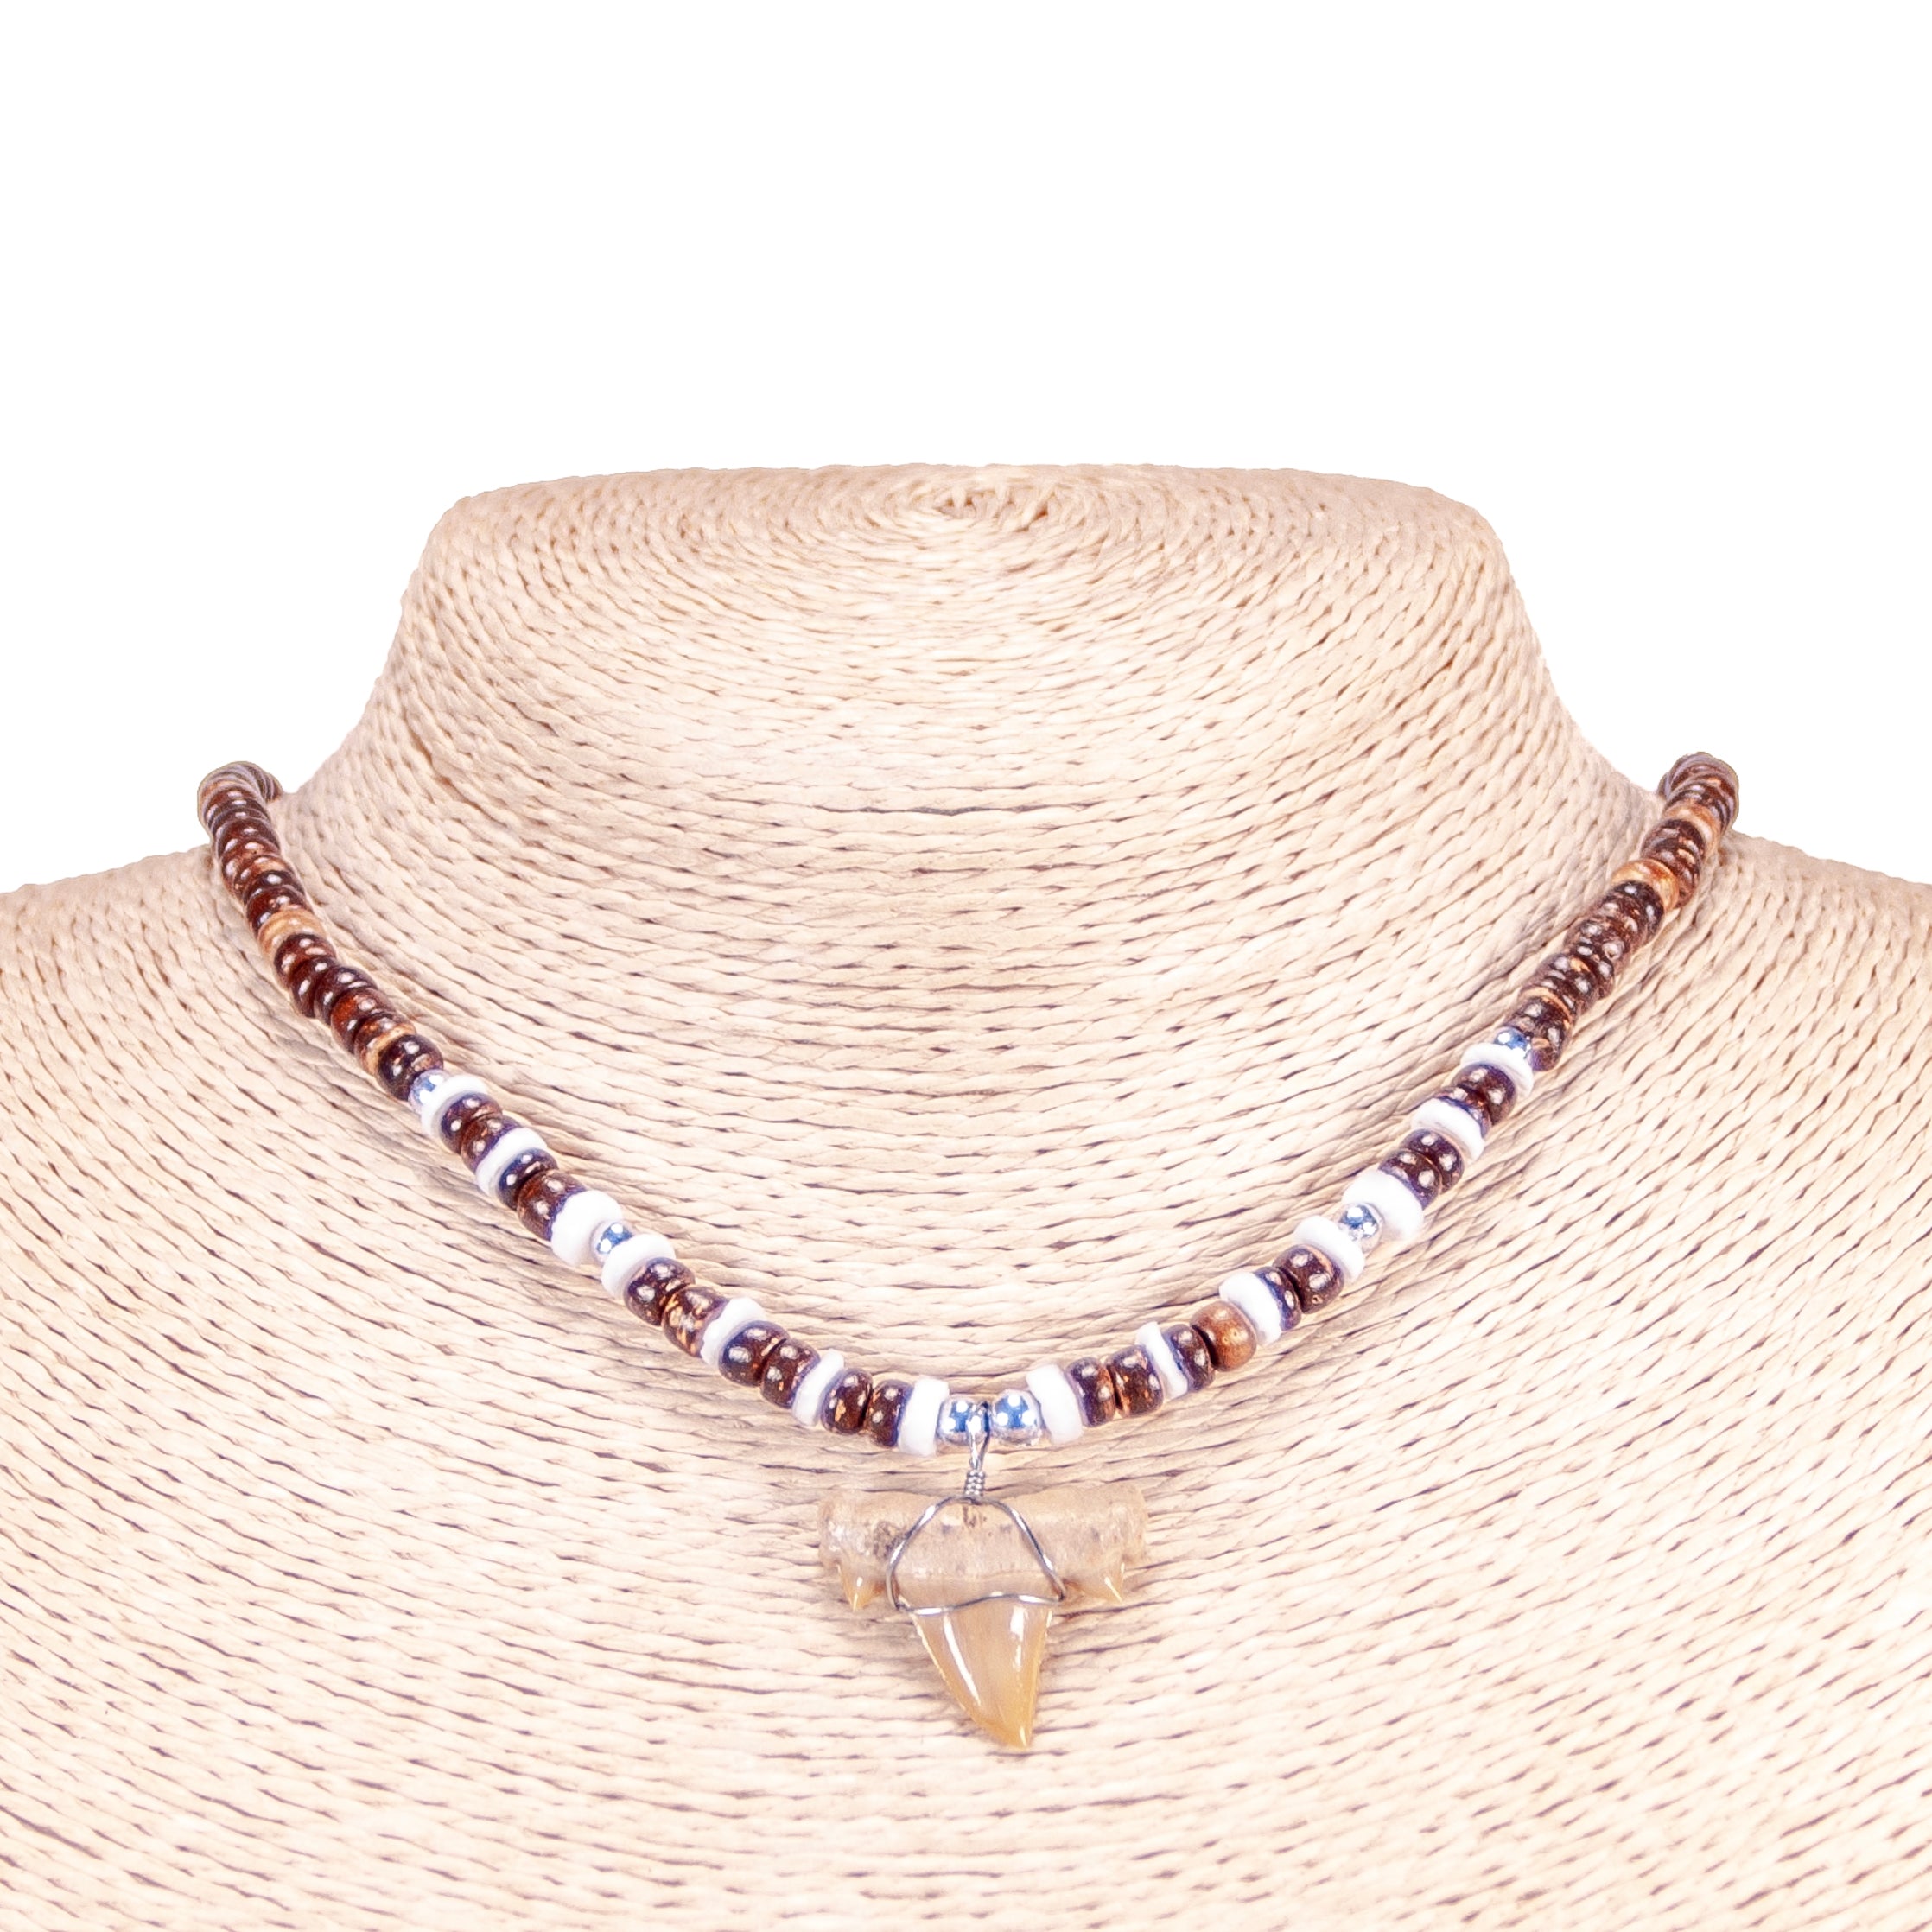 1"+ Shark Tooth Pendant on Brown Coconut and Puka Shell Beads Necklace